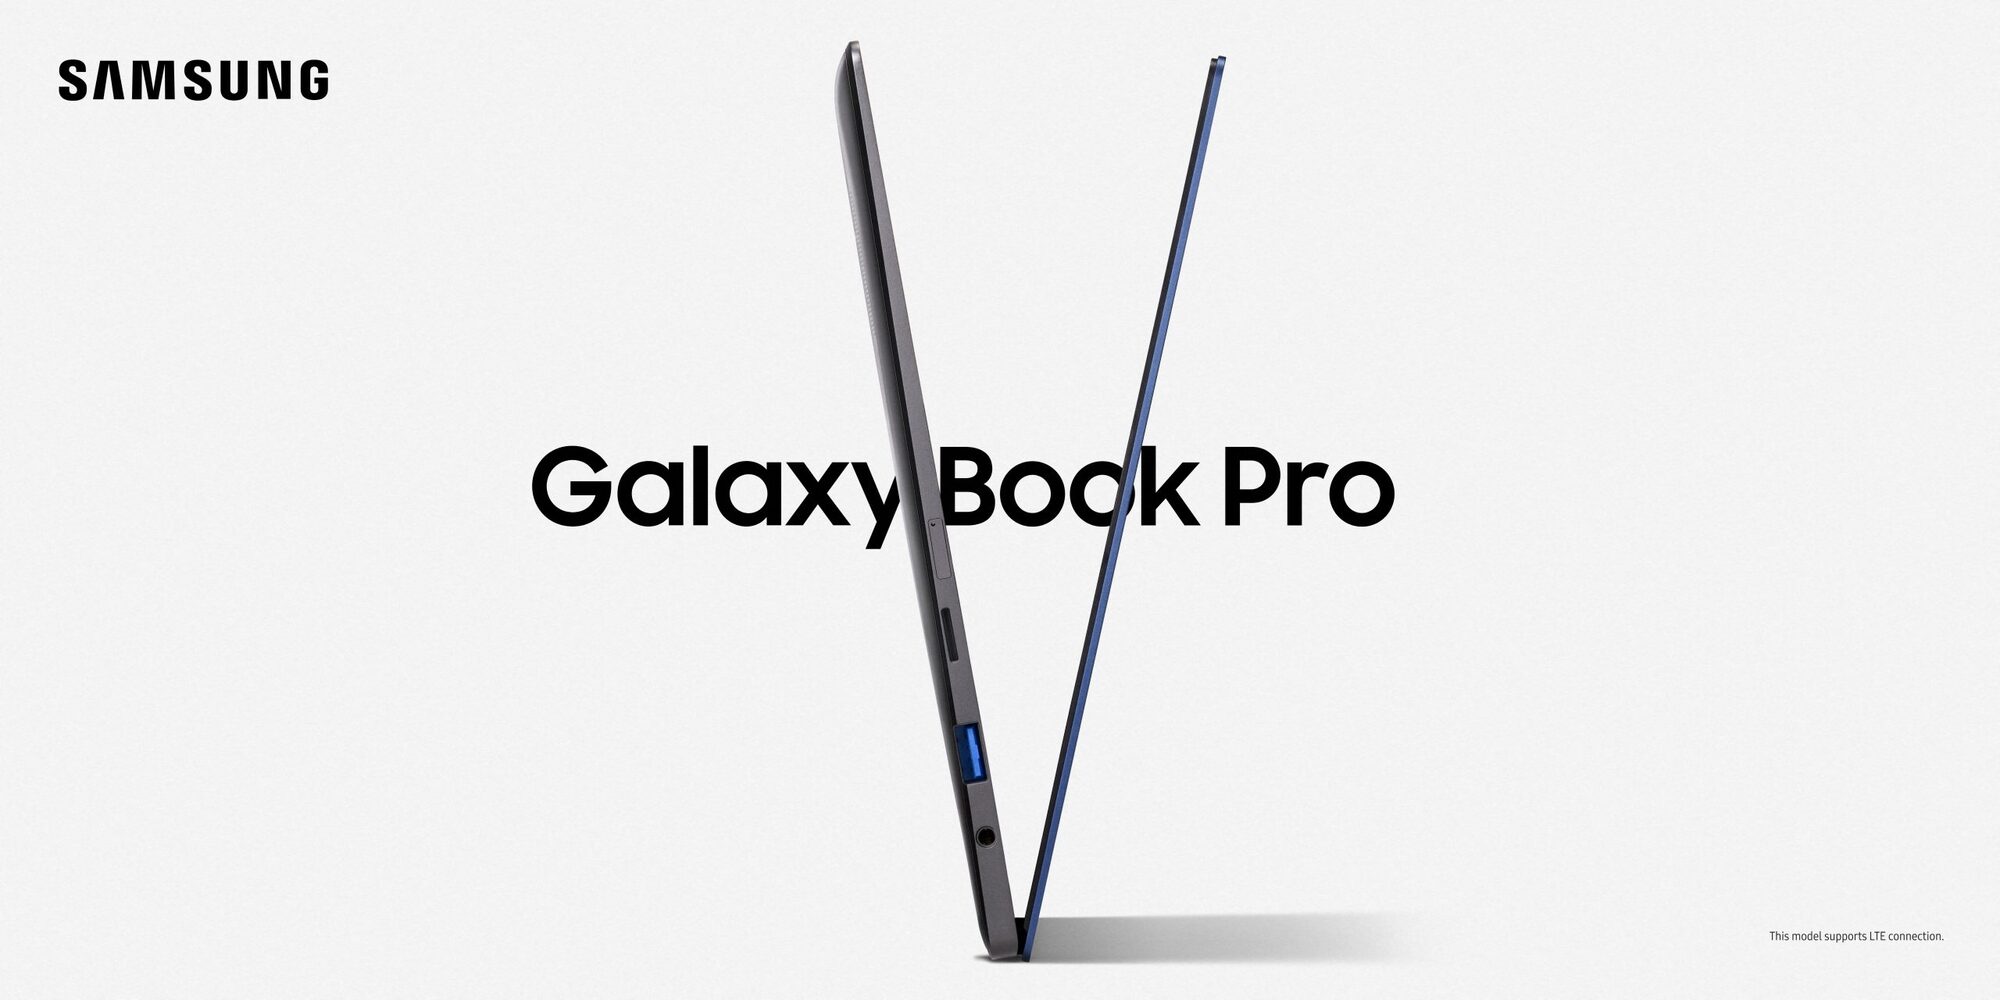 I have a samsung galaxy book 3 pro 360  After upgrading to Windows 11 the fingerprint... Galaxy_Book_Pro_13inch_MysticBlue_LTE_3_210416092724-Copy-scaled.jpg